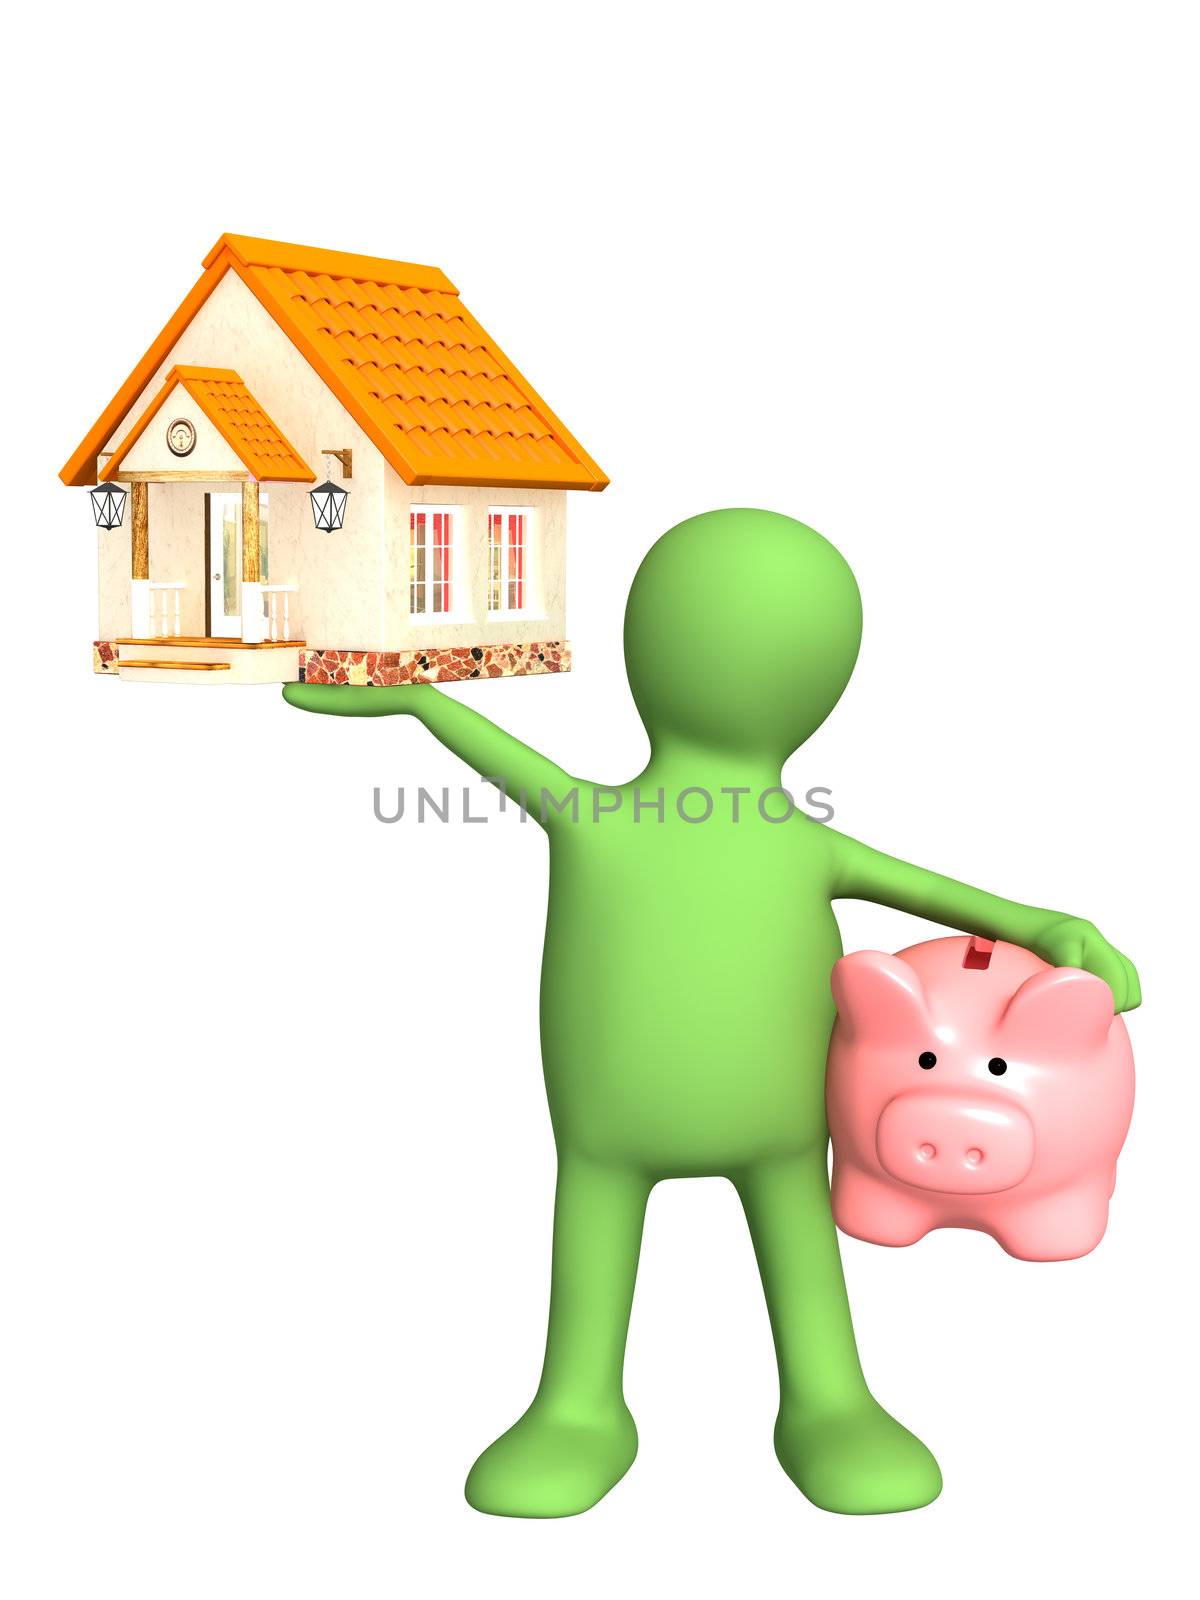 Puppet with piggy bank and house. Isolated over white